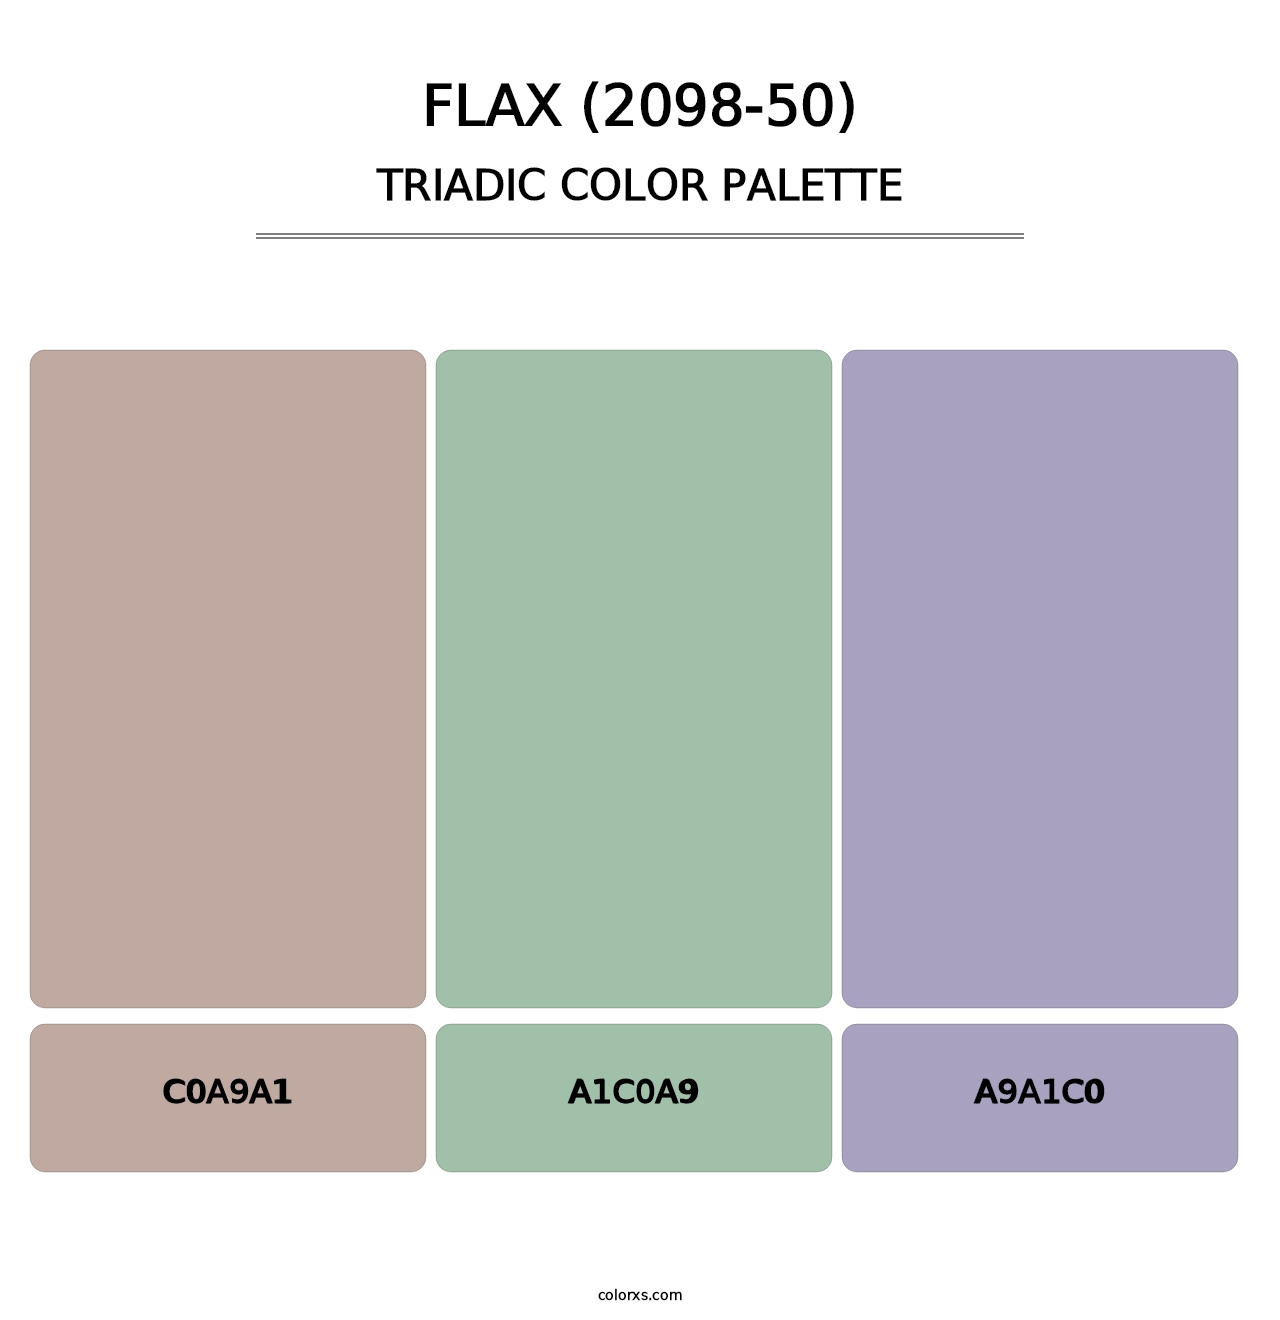 Flax (2098-50) - Triadic Color Palette